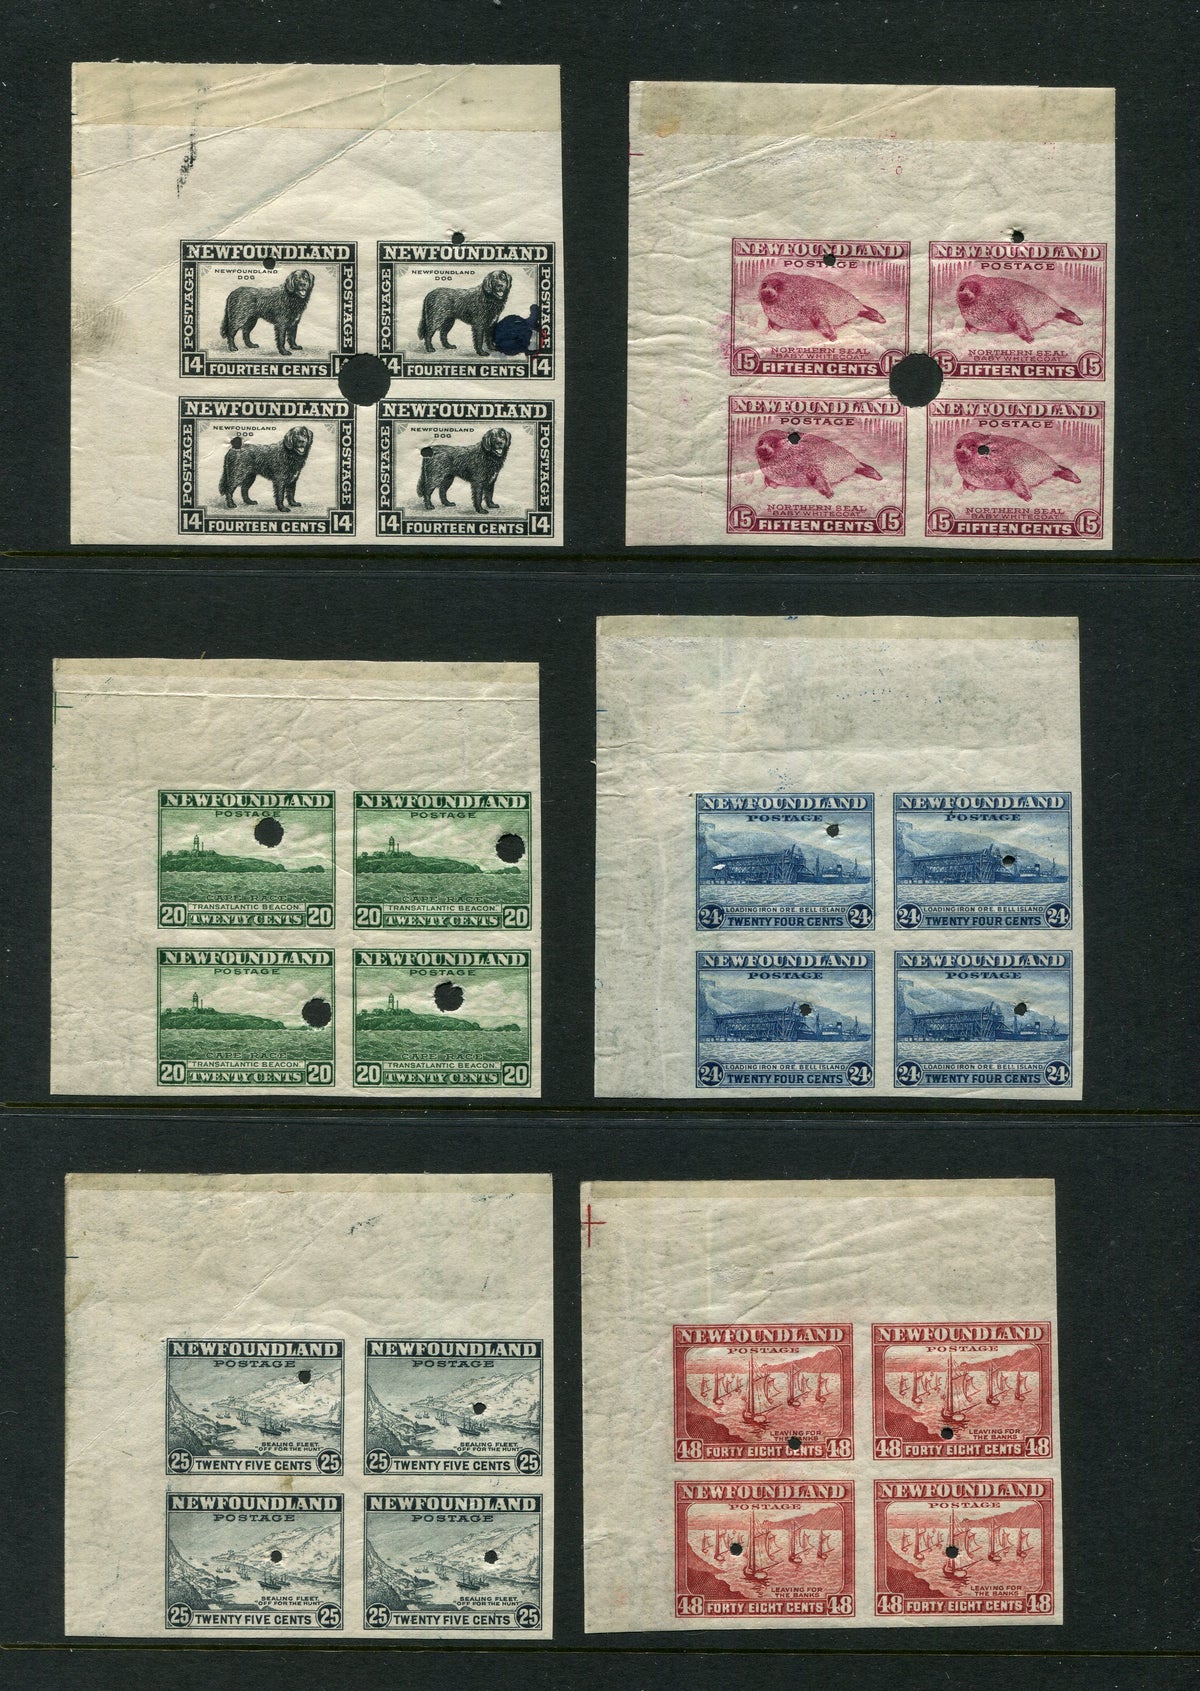 0253NF2404 - Newfoundland #253i-266ii - Imperf Block Security Punch Collection